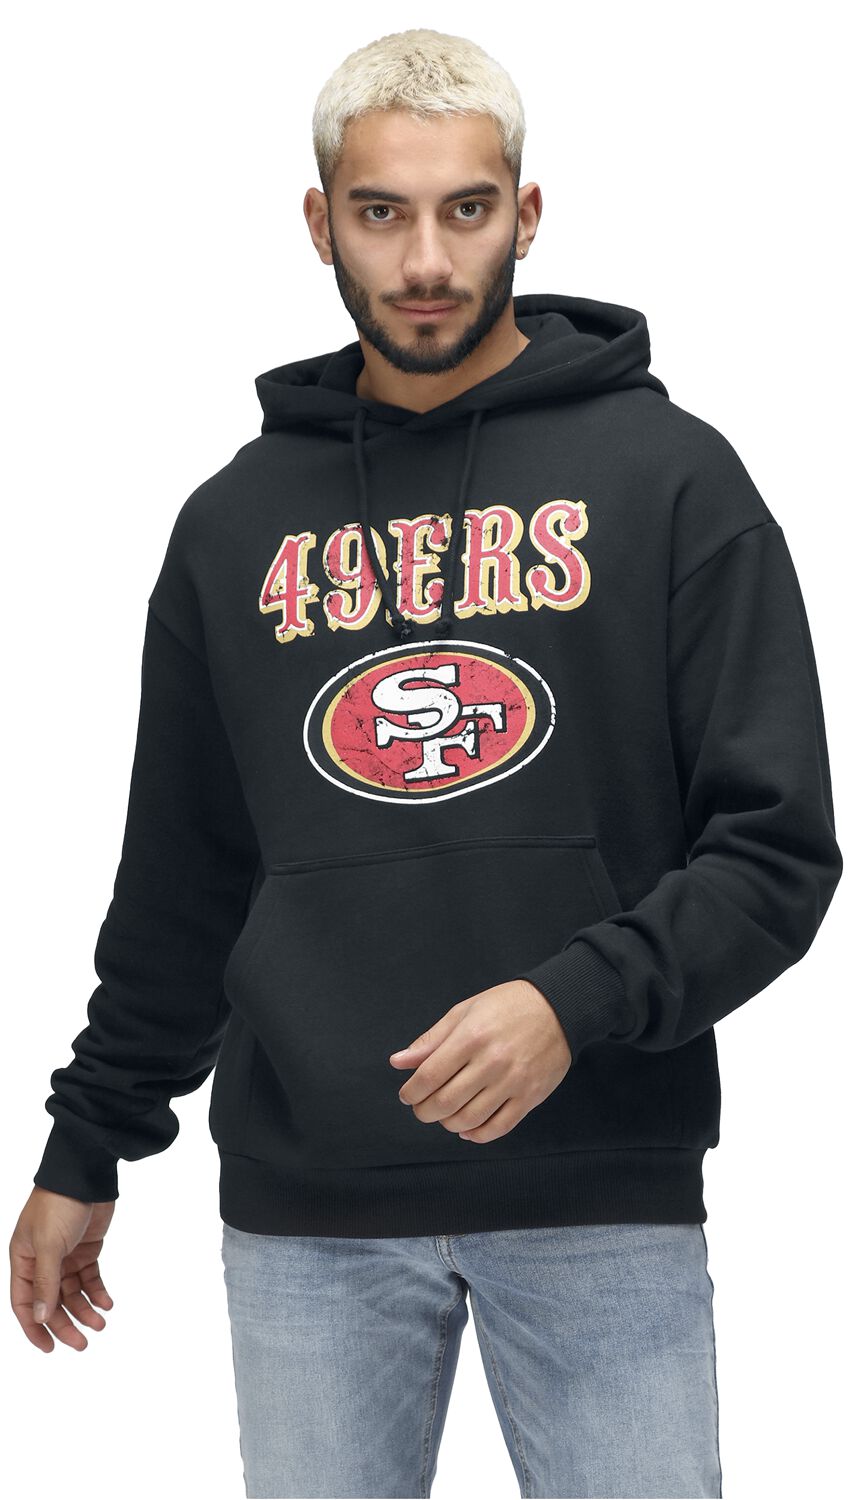 NFL 49ers Logo, Recovered Clothing Hooded sweater